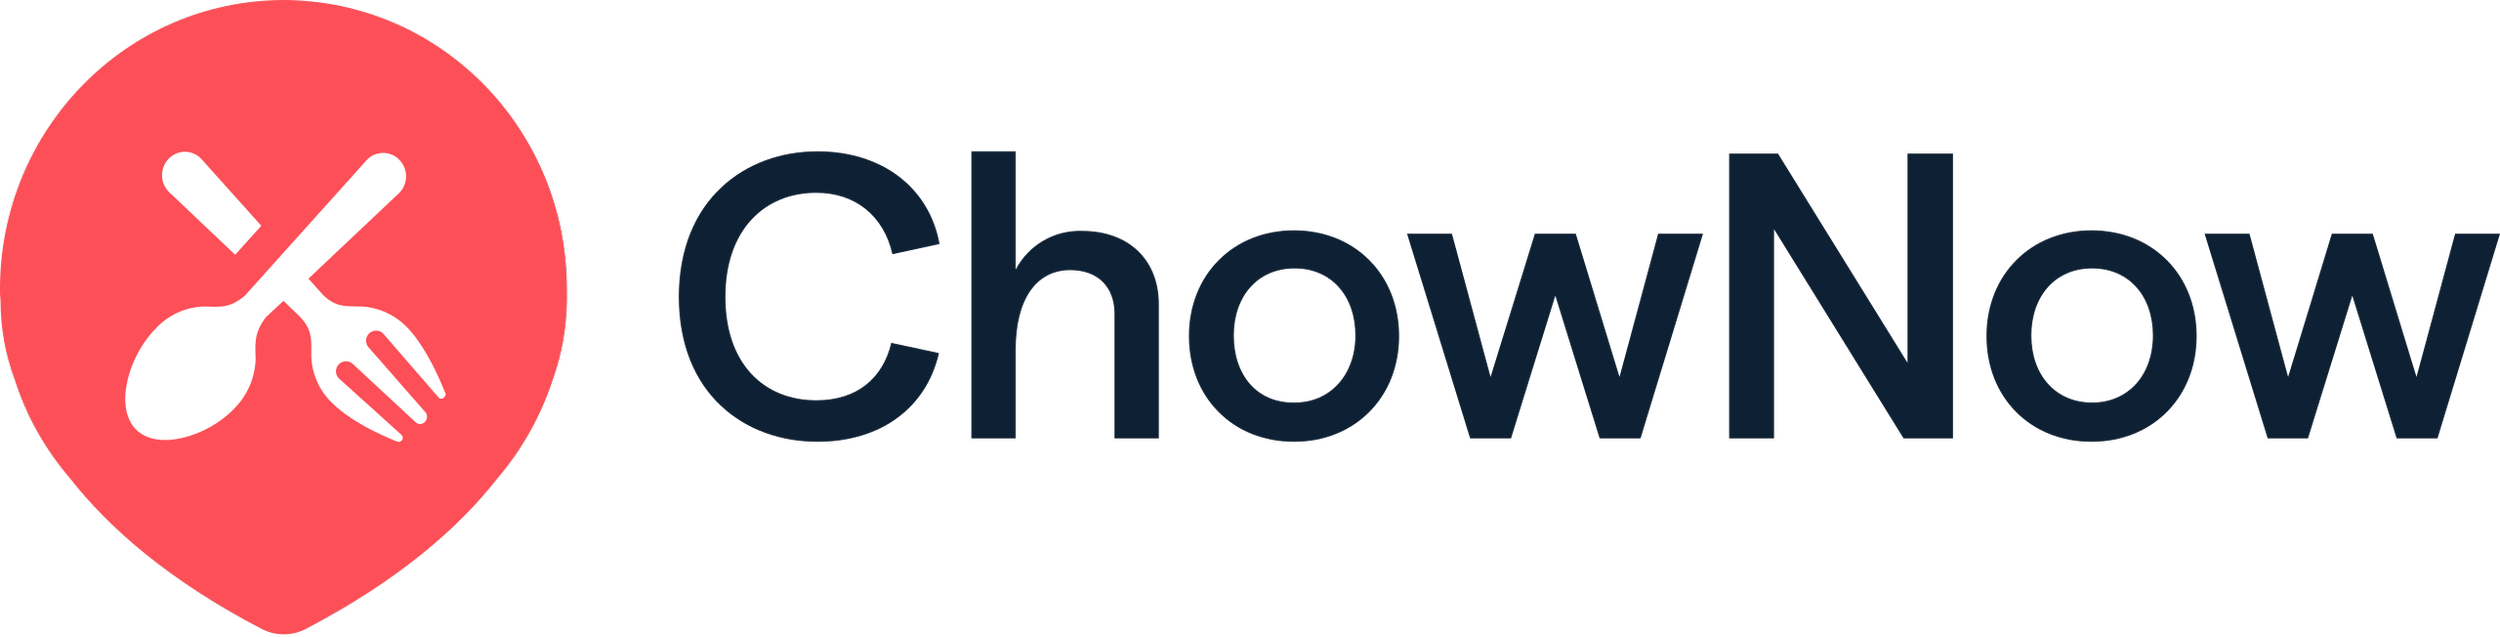 Chownow-logo-new.svg.png